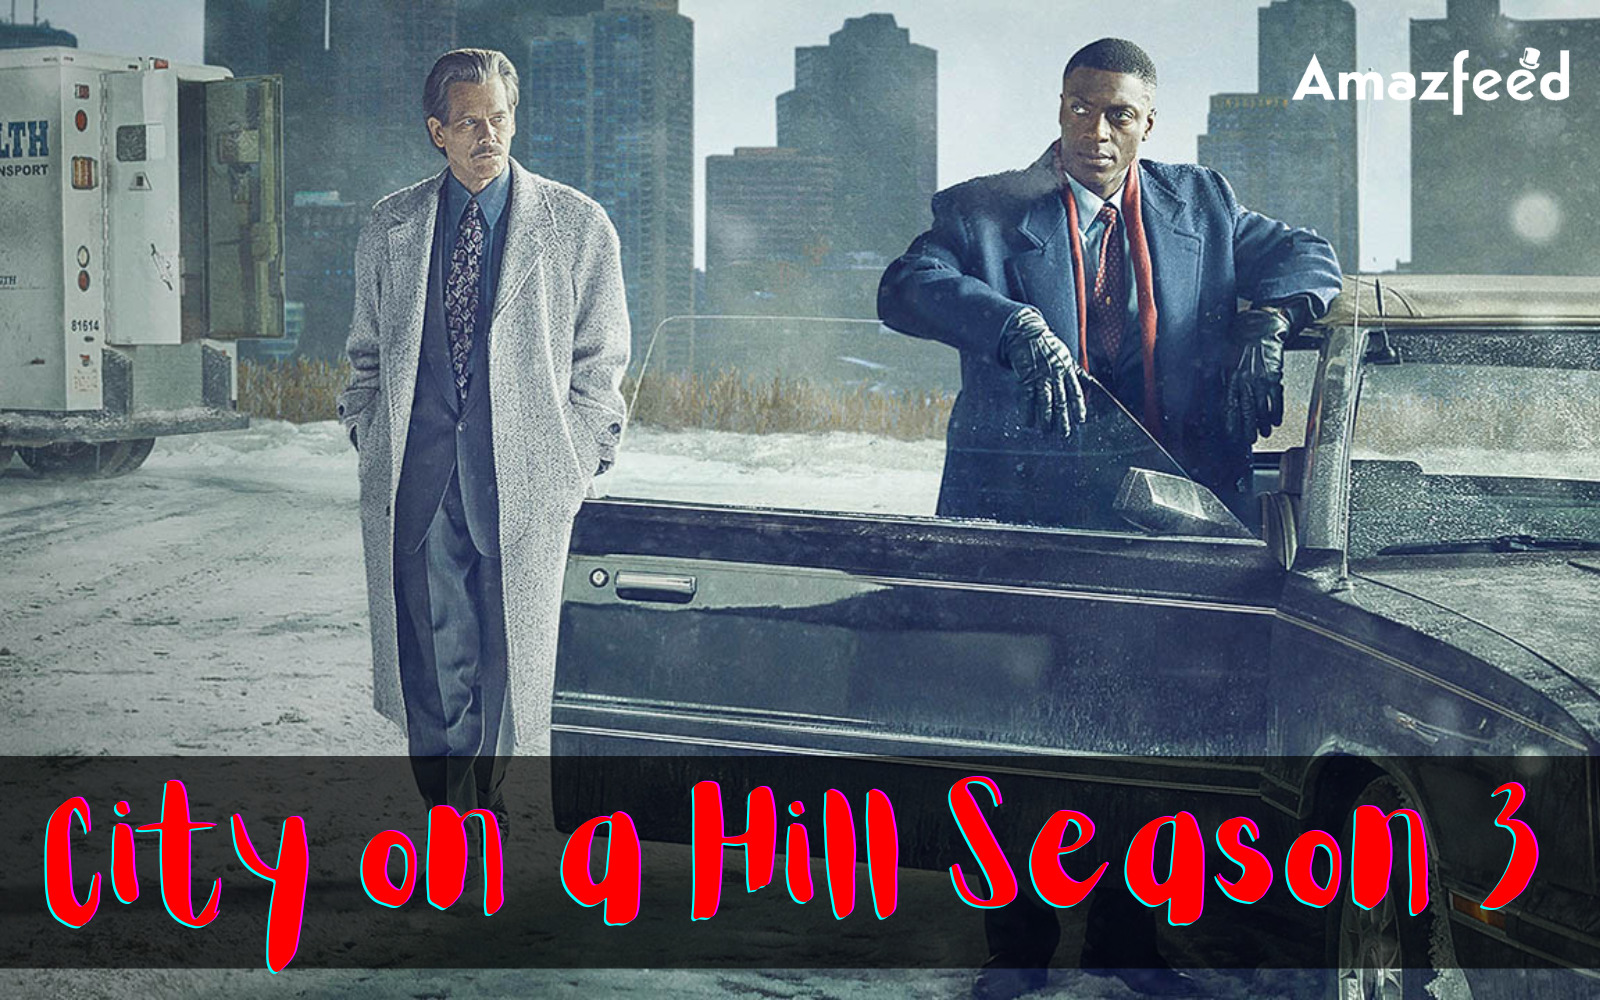 Who Will Be Part Of City on a Hill Season 3 (Cast and Character)